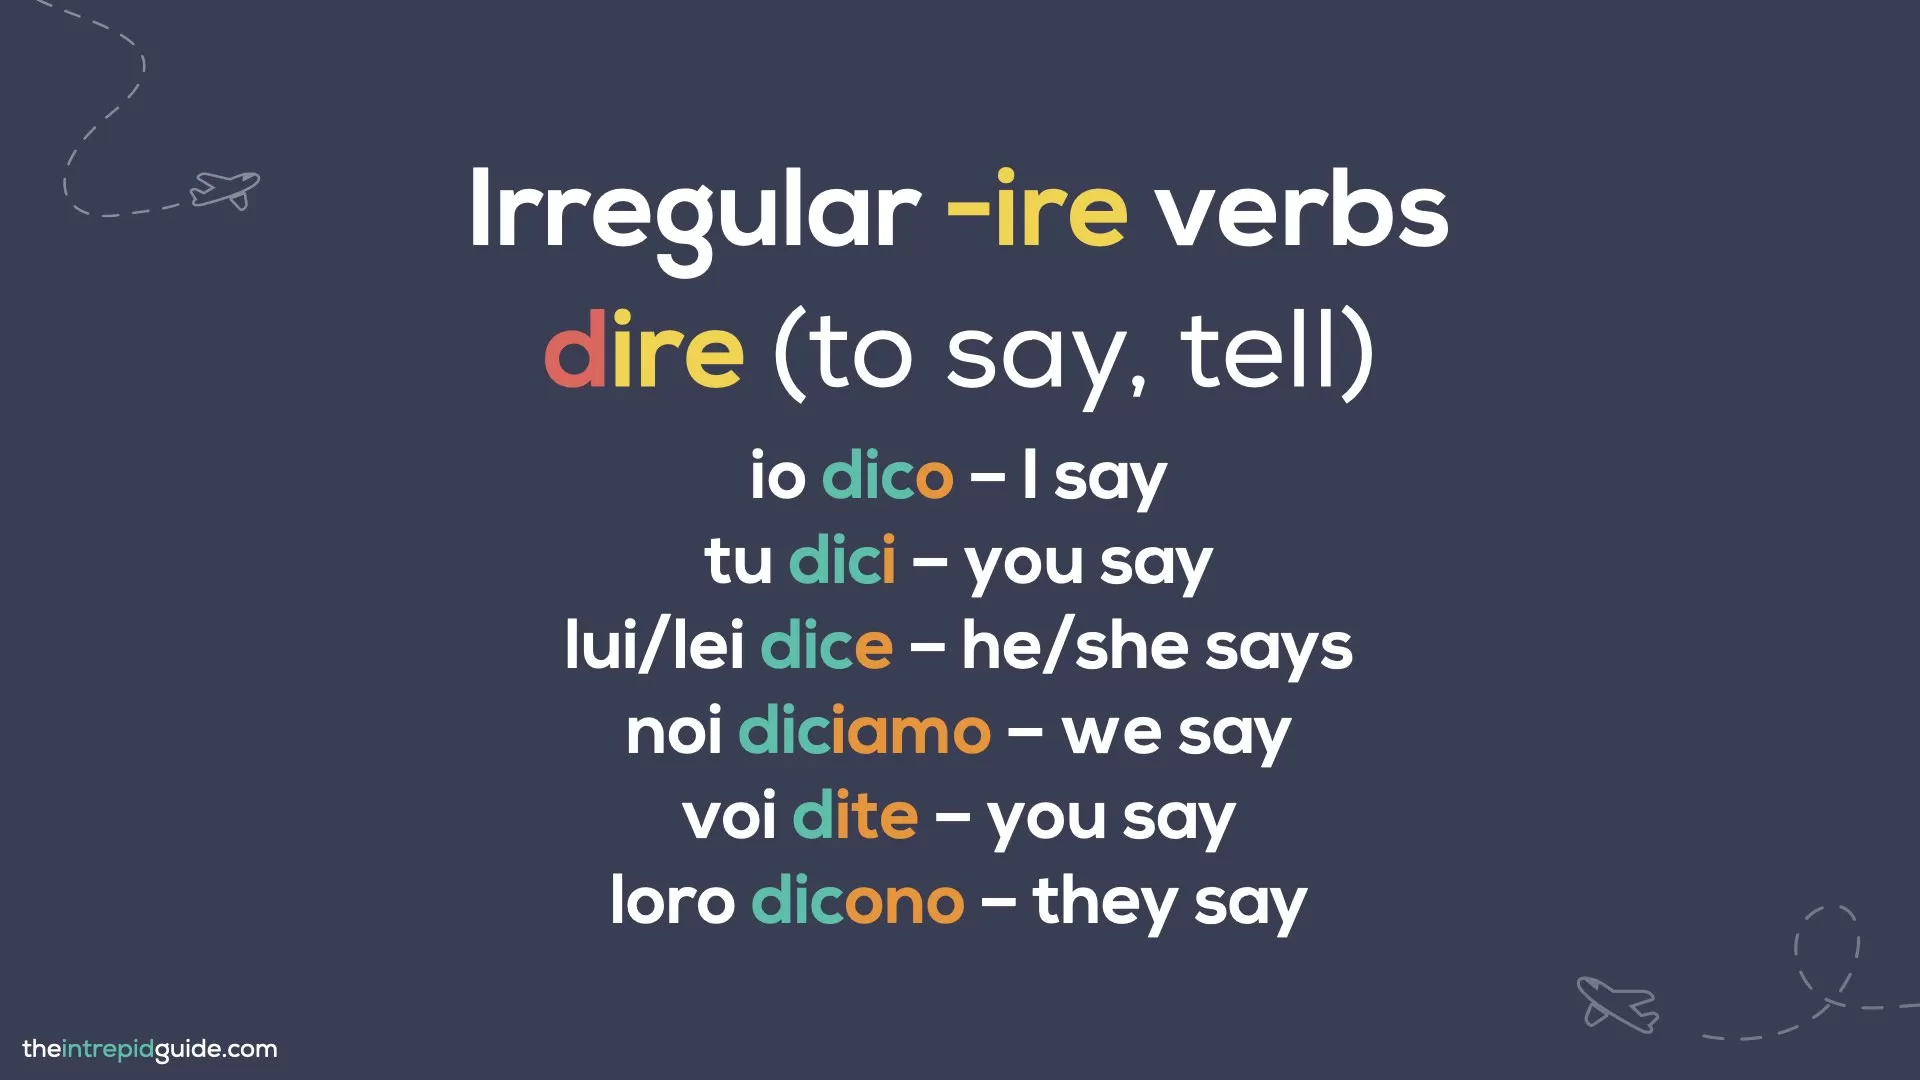 How to Conjugate Italian Verbs - Conjugating the verb dire - to say, tell